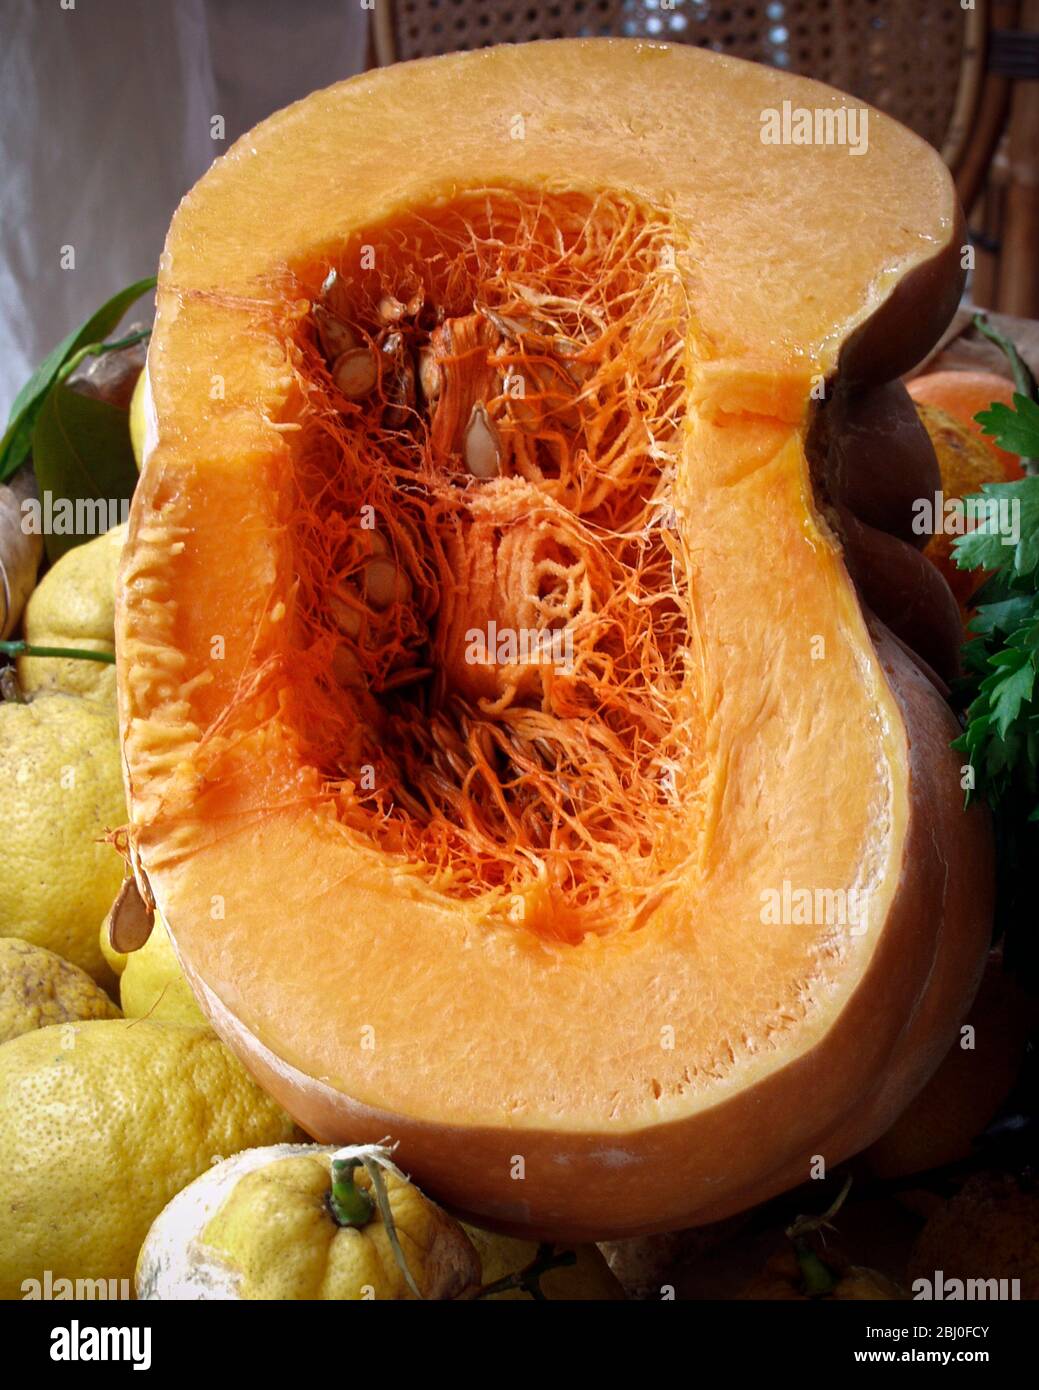 Huge pumpkin cut through showing fibrous interior with seeeds, surrounded by large and knobbly mediterranean lemons - Stock Photo